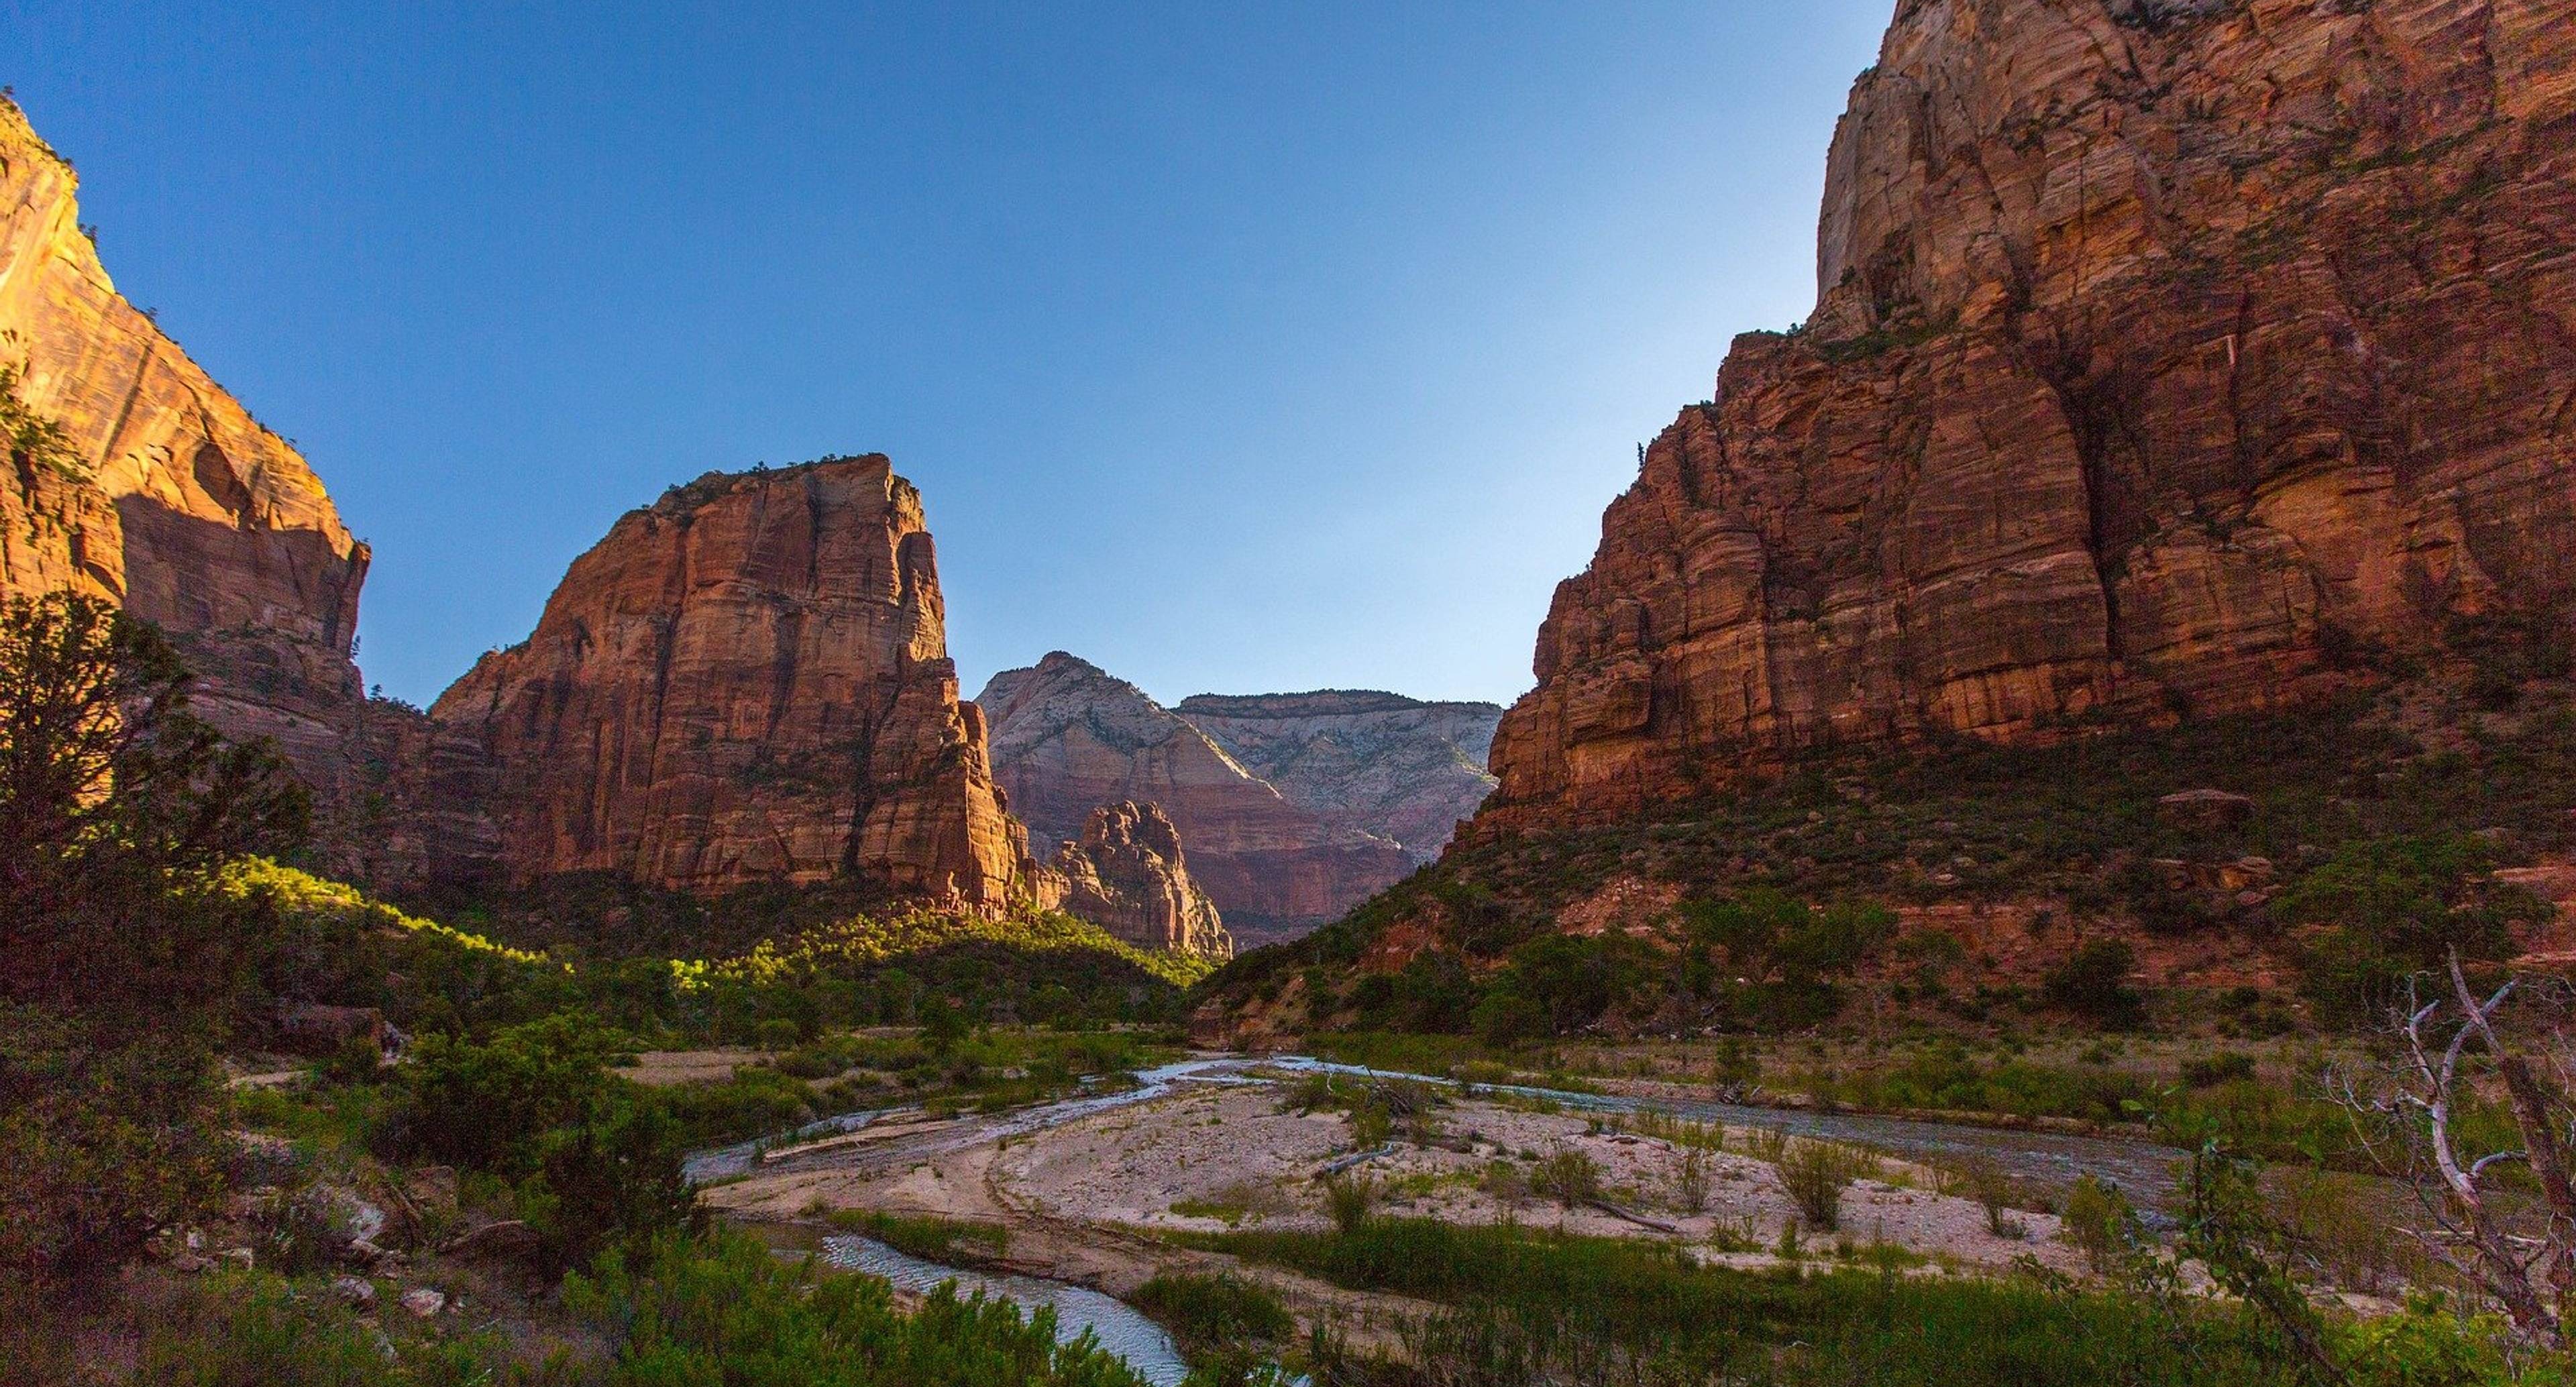 Explore Zion National Park and Drive to Lake Powell